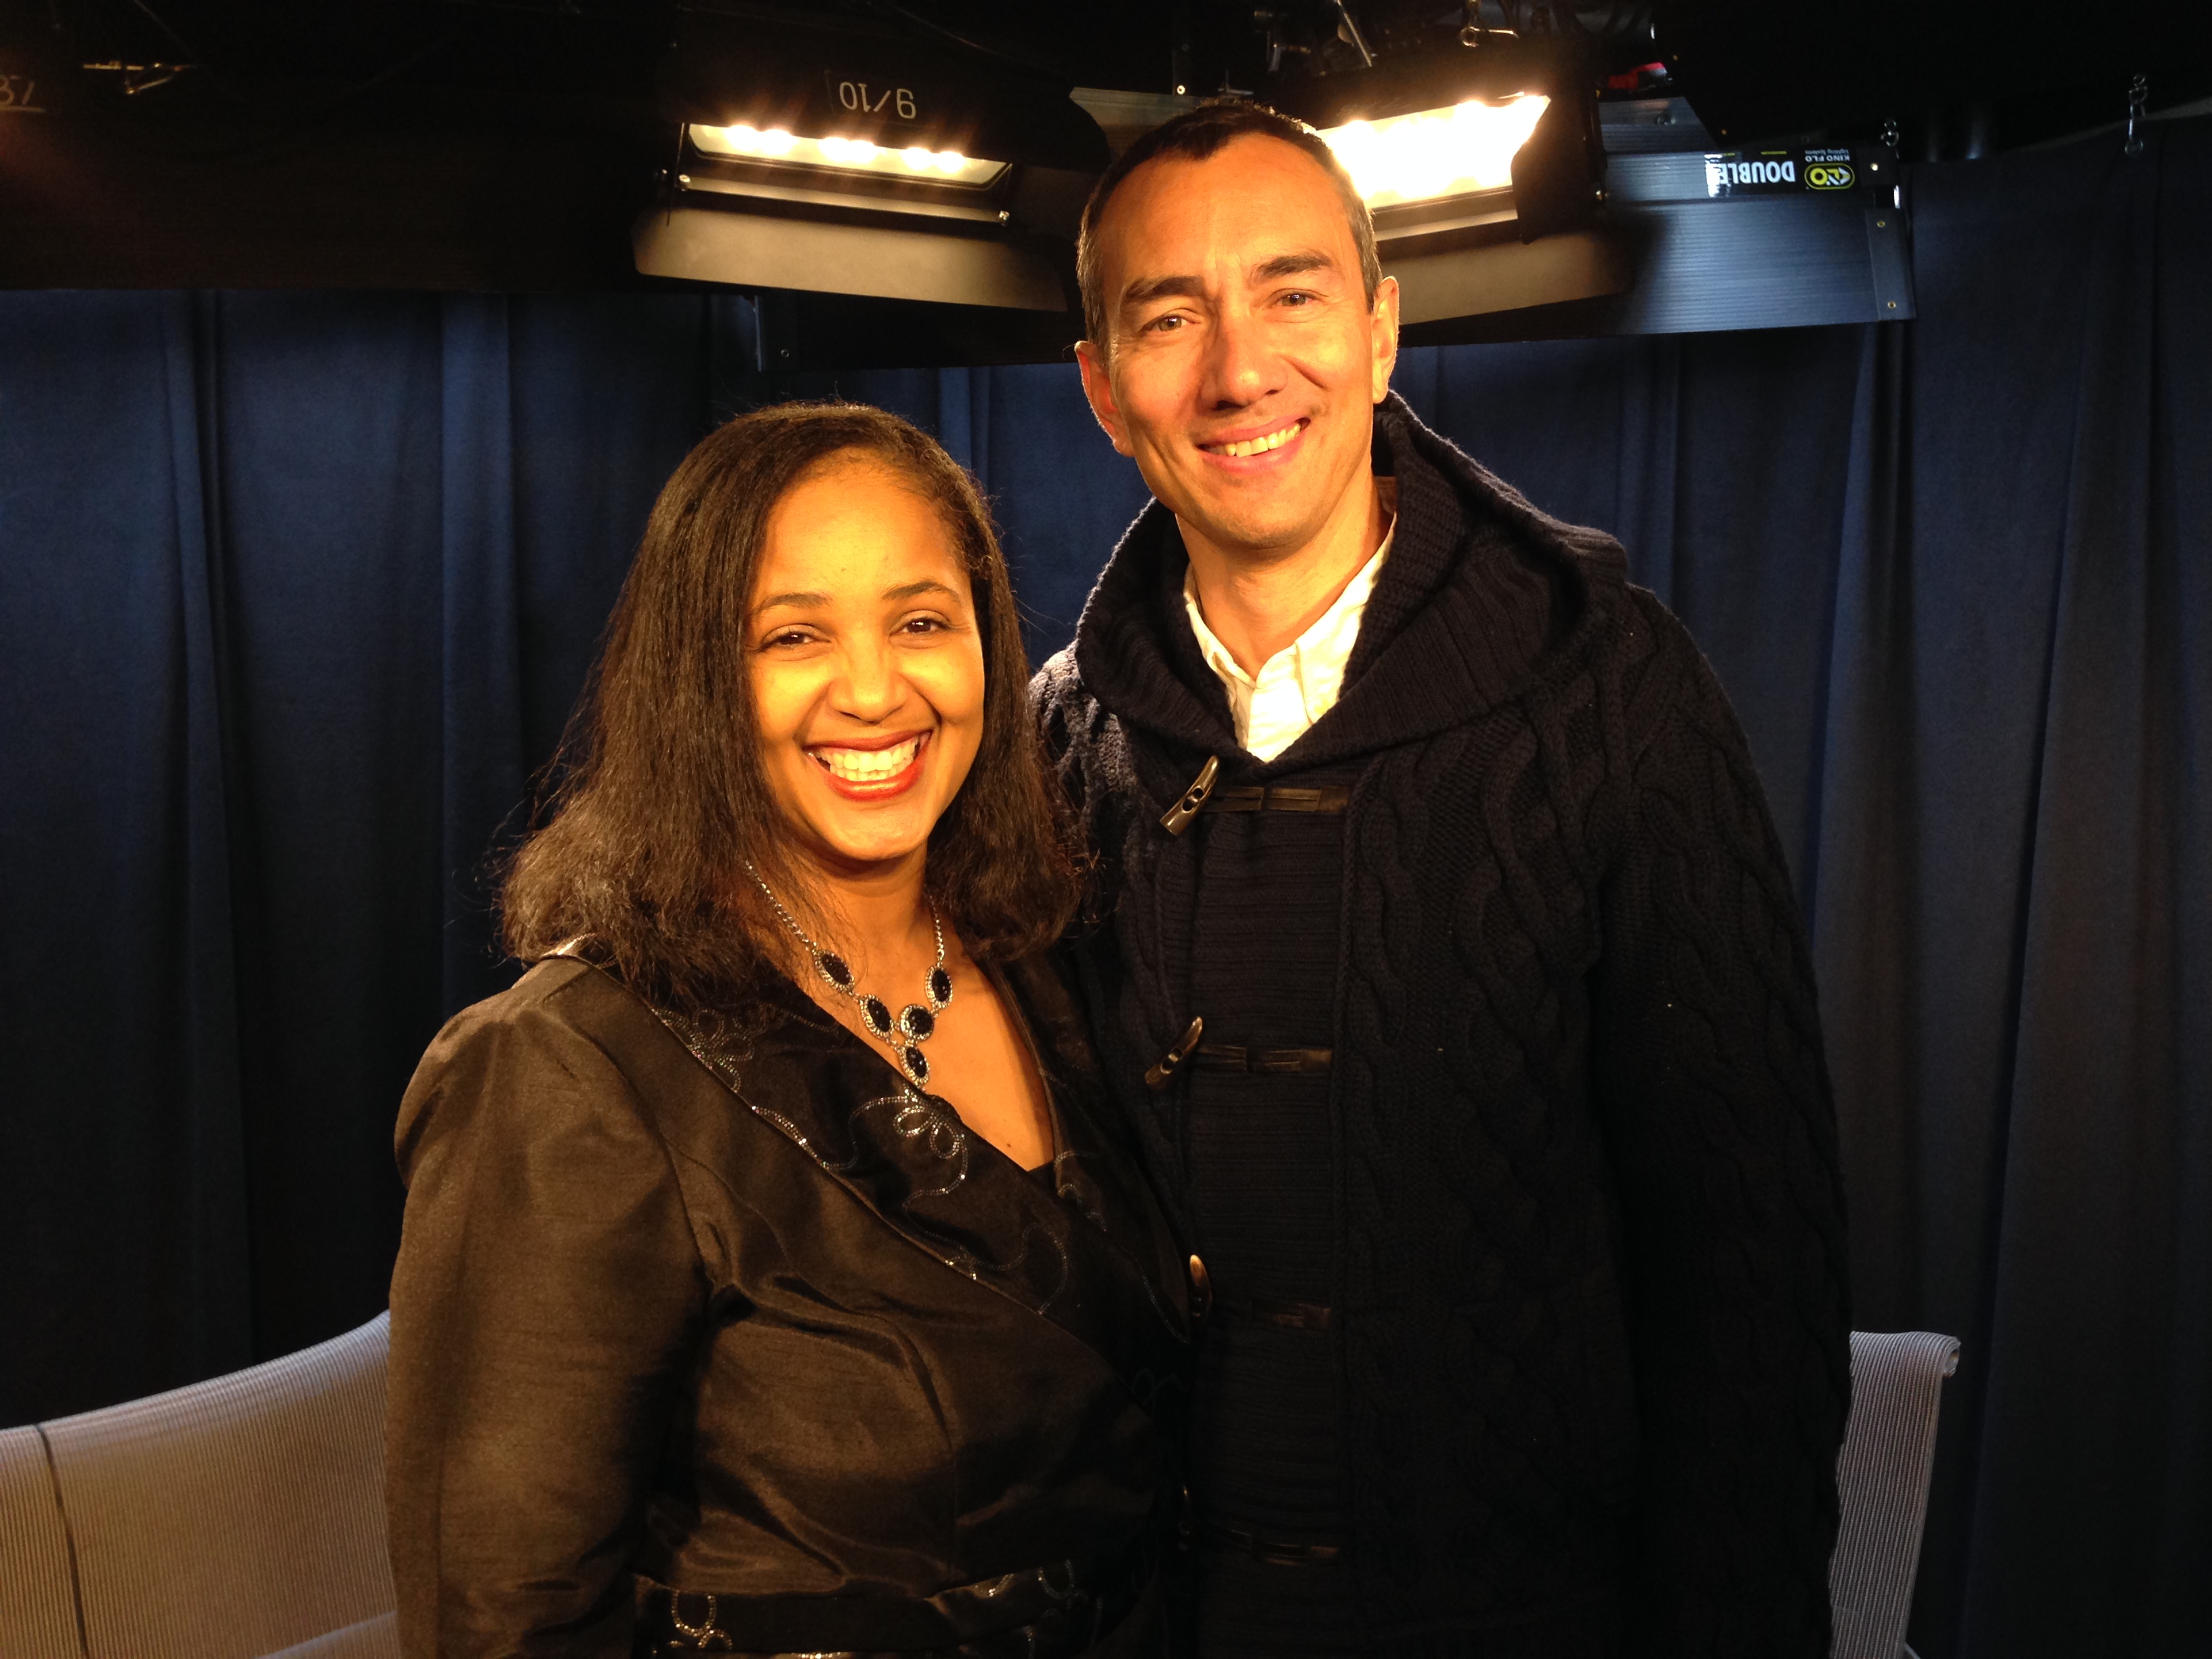 Here with TV host Anita Bailey being interviewed for her show MJ Connection at the Manhattan Network Studios.